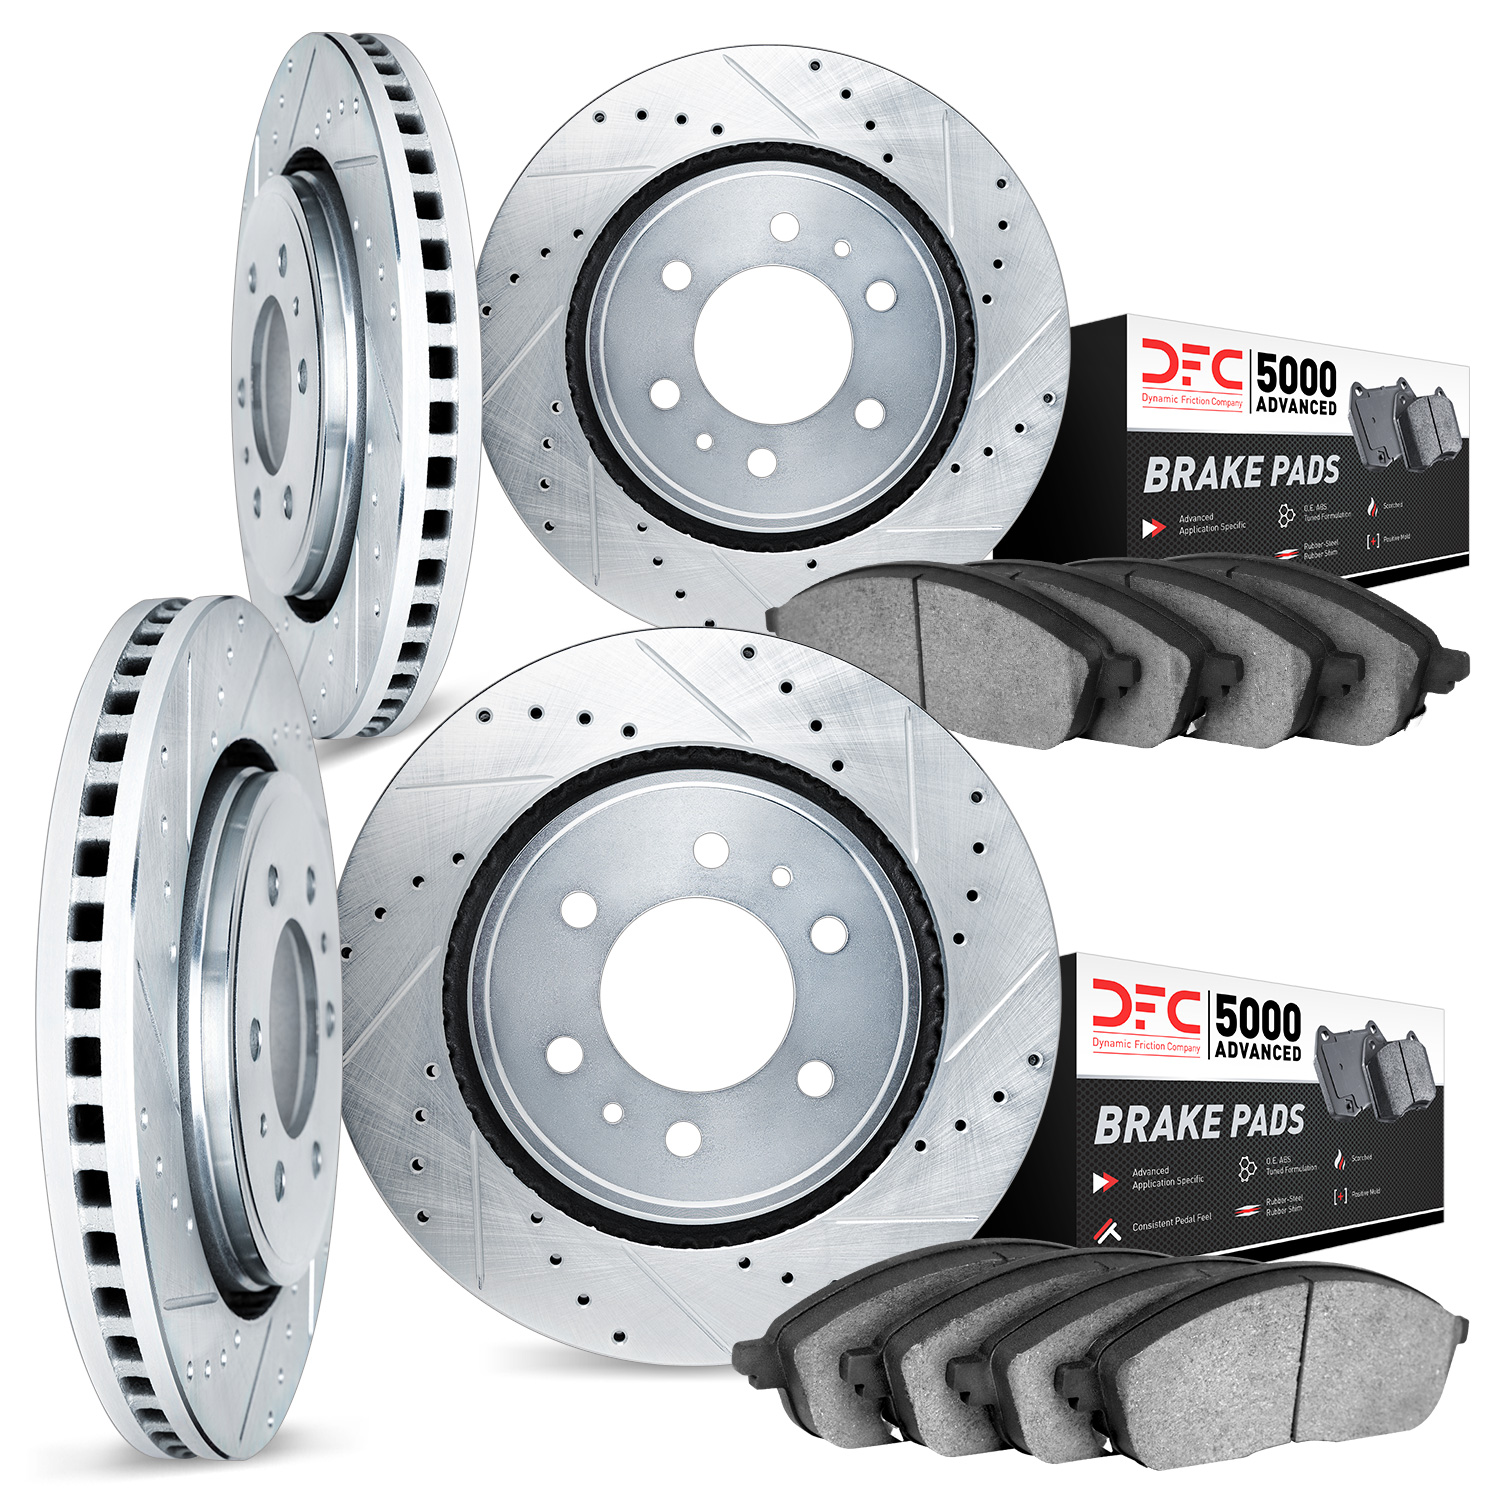 7504-54350 Drilled/Slotted Brake Rotors w/5000 Advanced Brake Pads Kit [Silver], 2004-2008 Ford/Lincoln/Mercury/Mazda, Position: